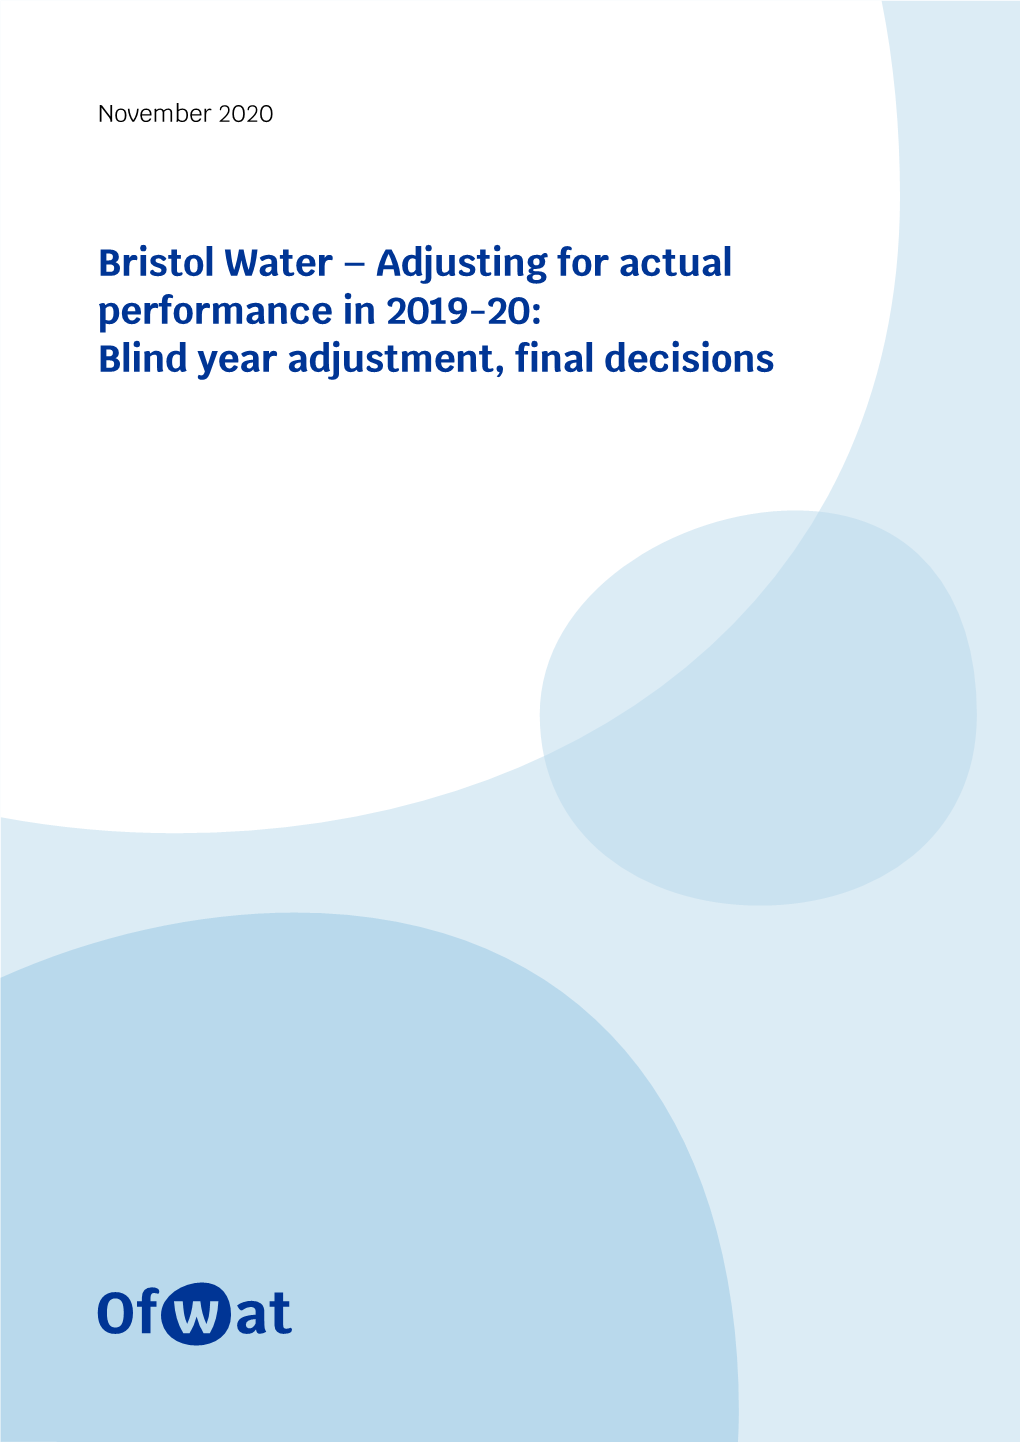 Bristol Water – Adjusting for Actual Performance in 2019-20: Blind Year Adjustment, Final Decisions Blind Year Adjustments, Final Decision, Bristol Water